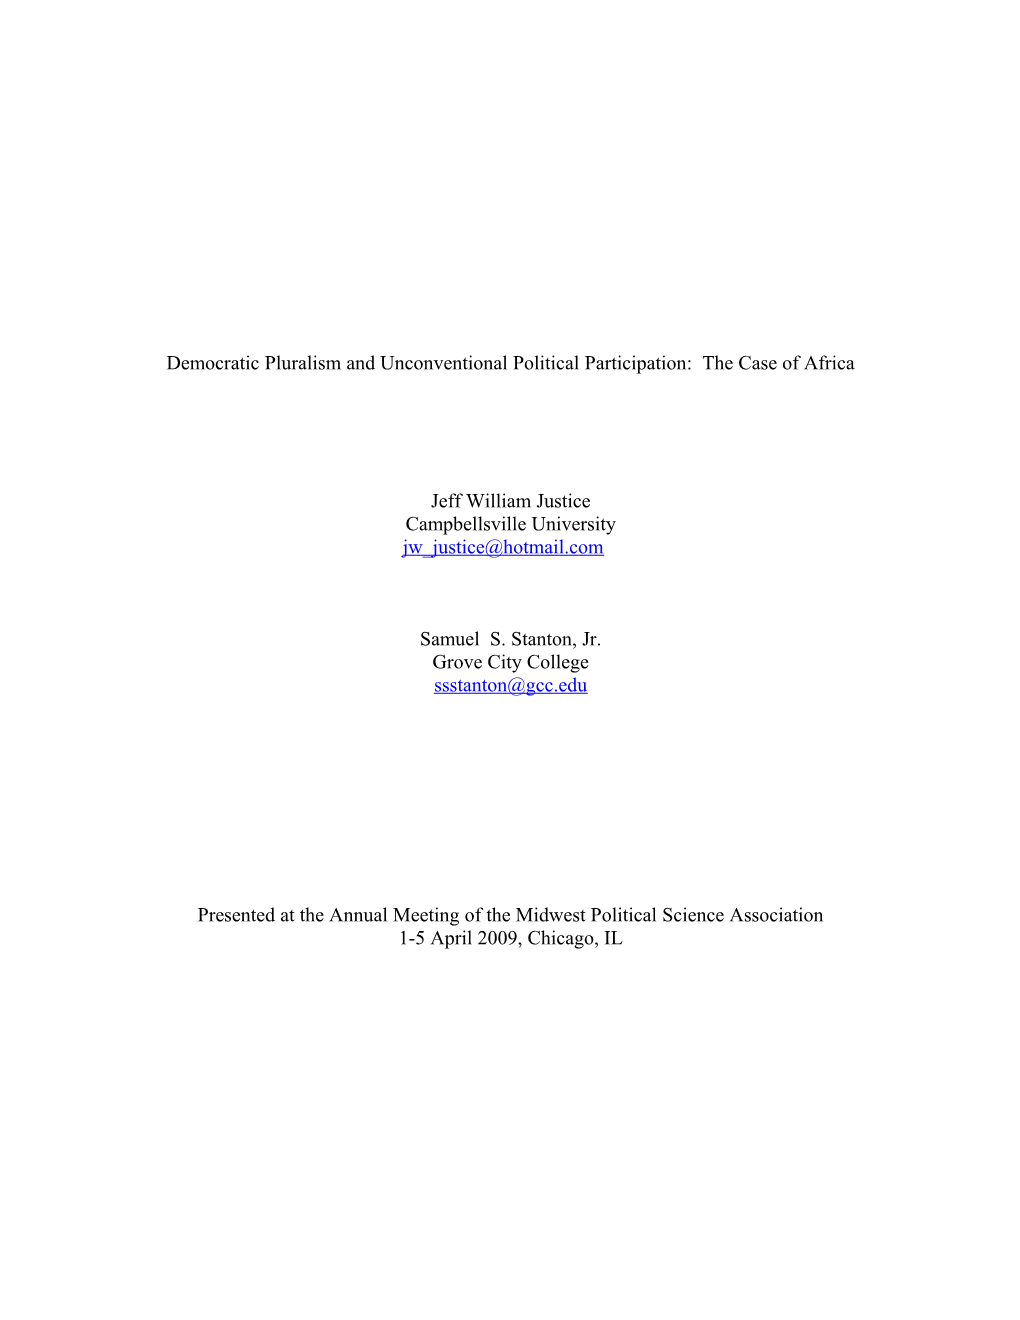 Democratic Pluralism and Unconventional Political Participation: the Case of Africa